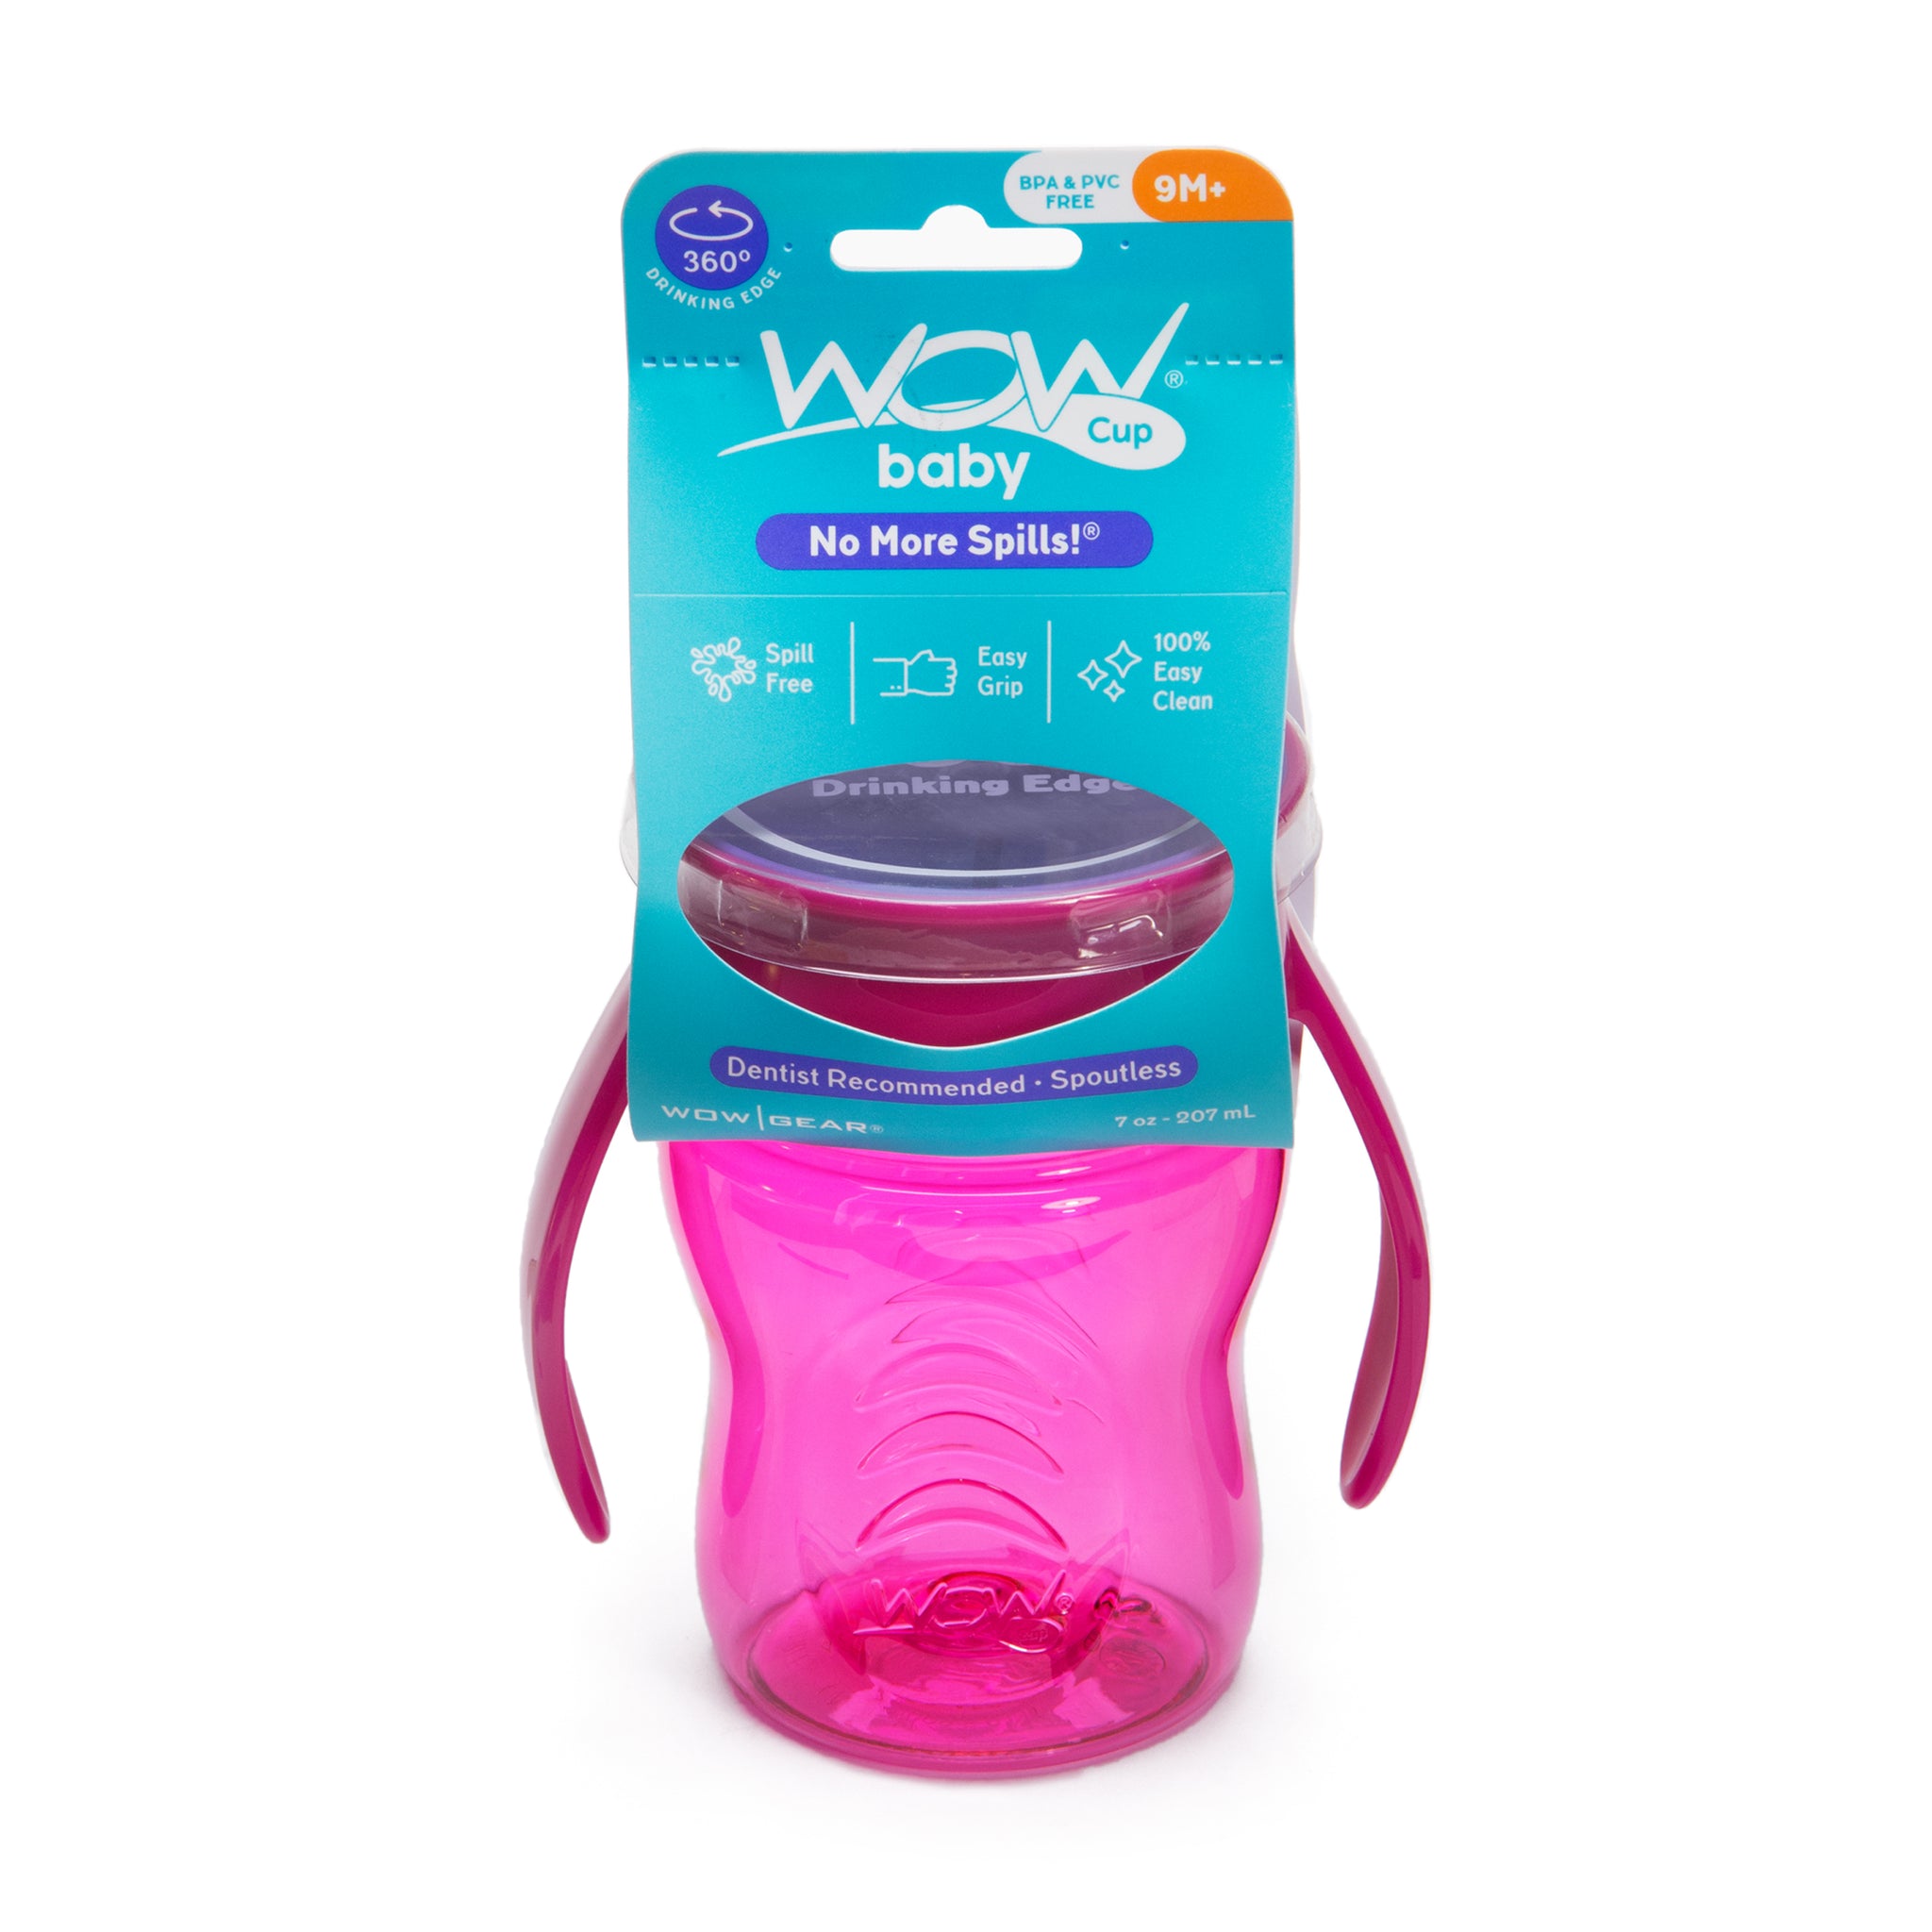 As Seen on TV Wow Cup, Spill-Proof Cup 4 pack 2 Pink Algeria